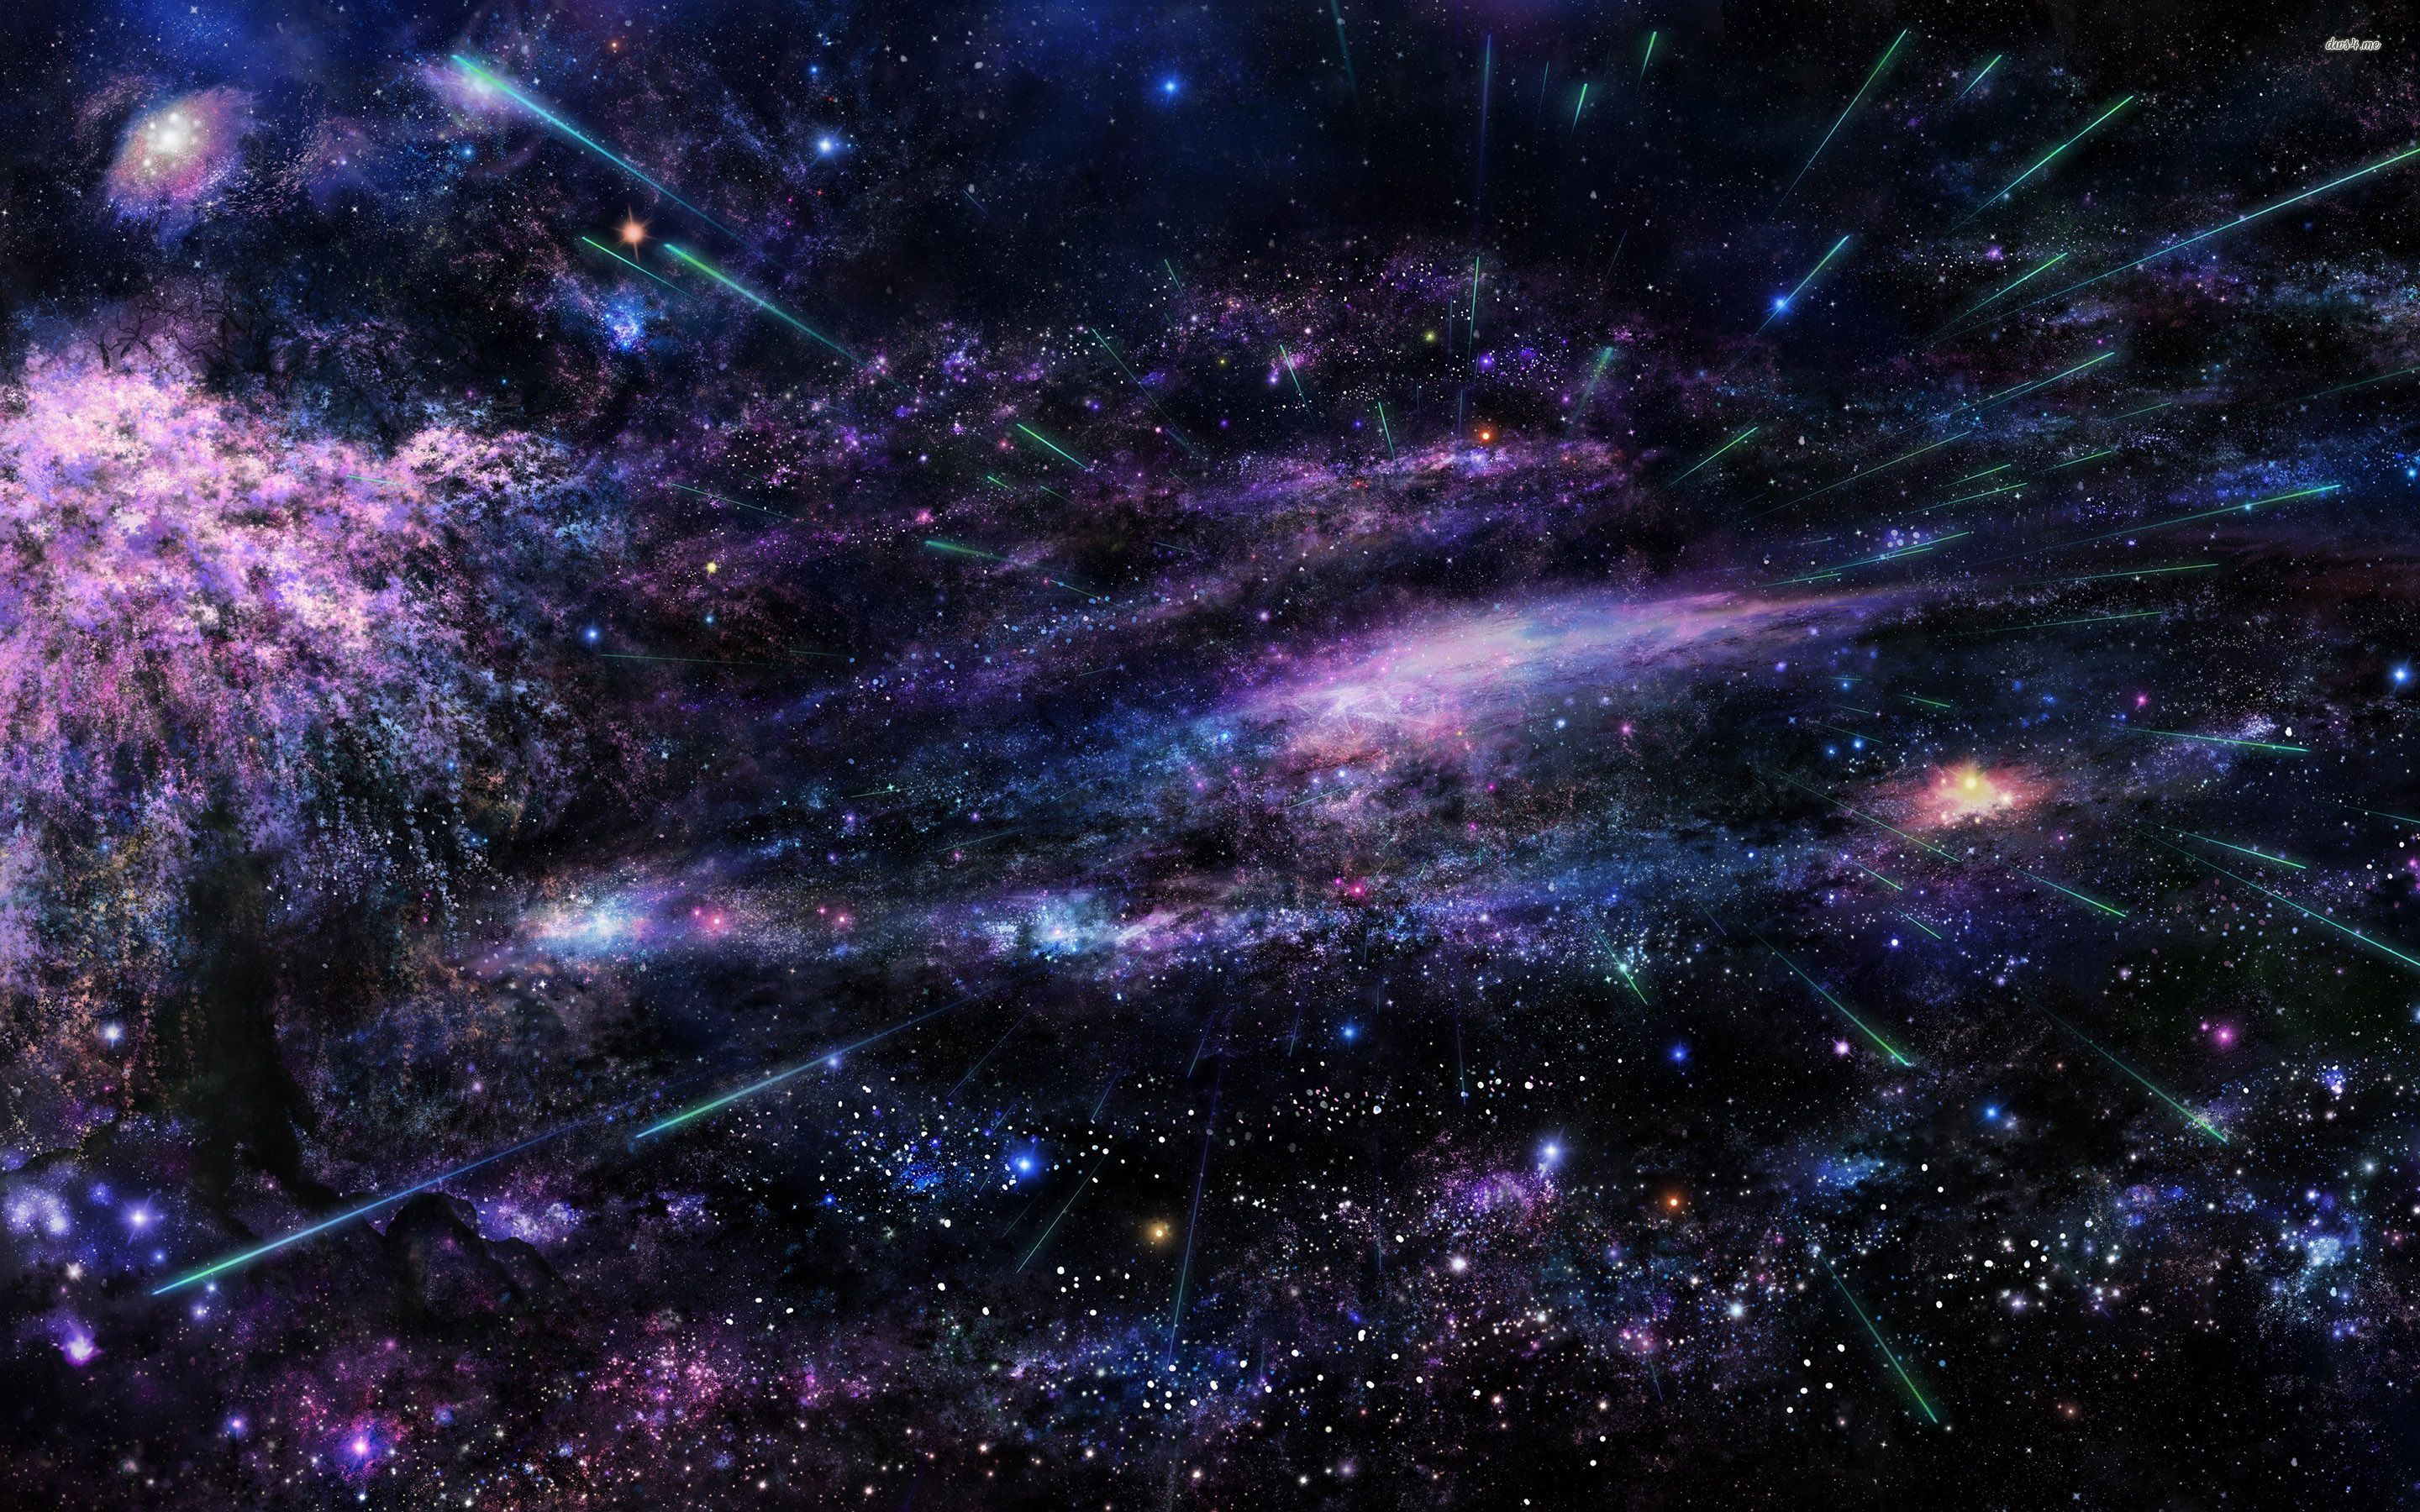 Universe wallpaper - Space wallpapers - #19215